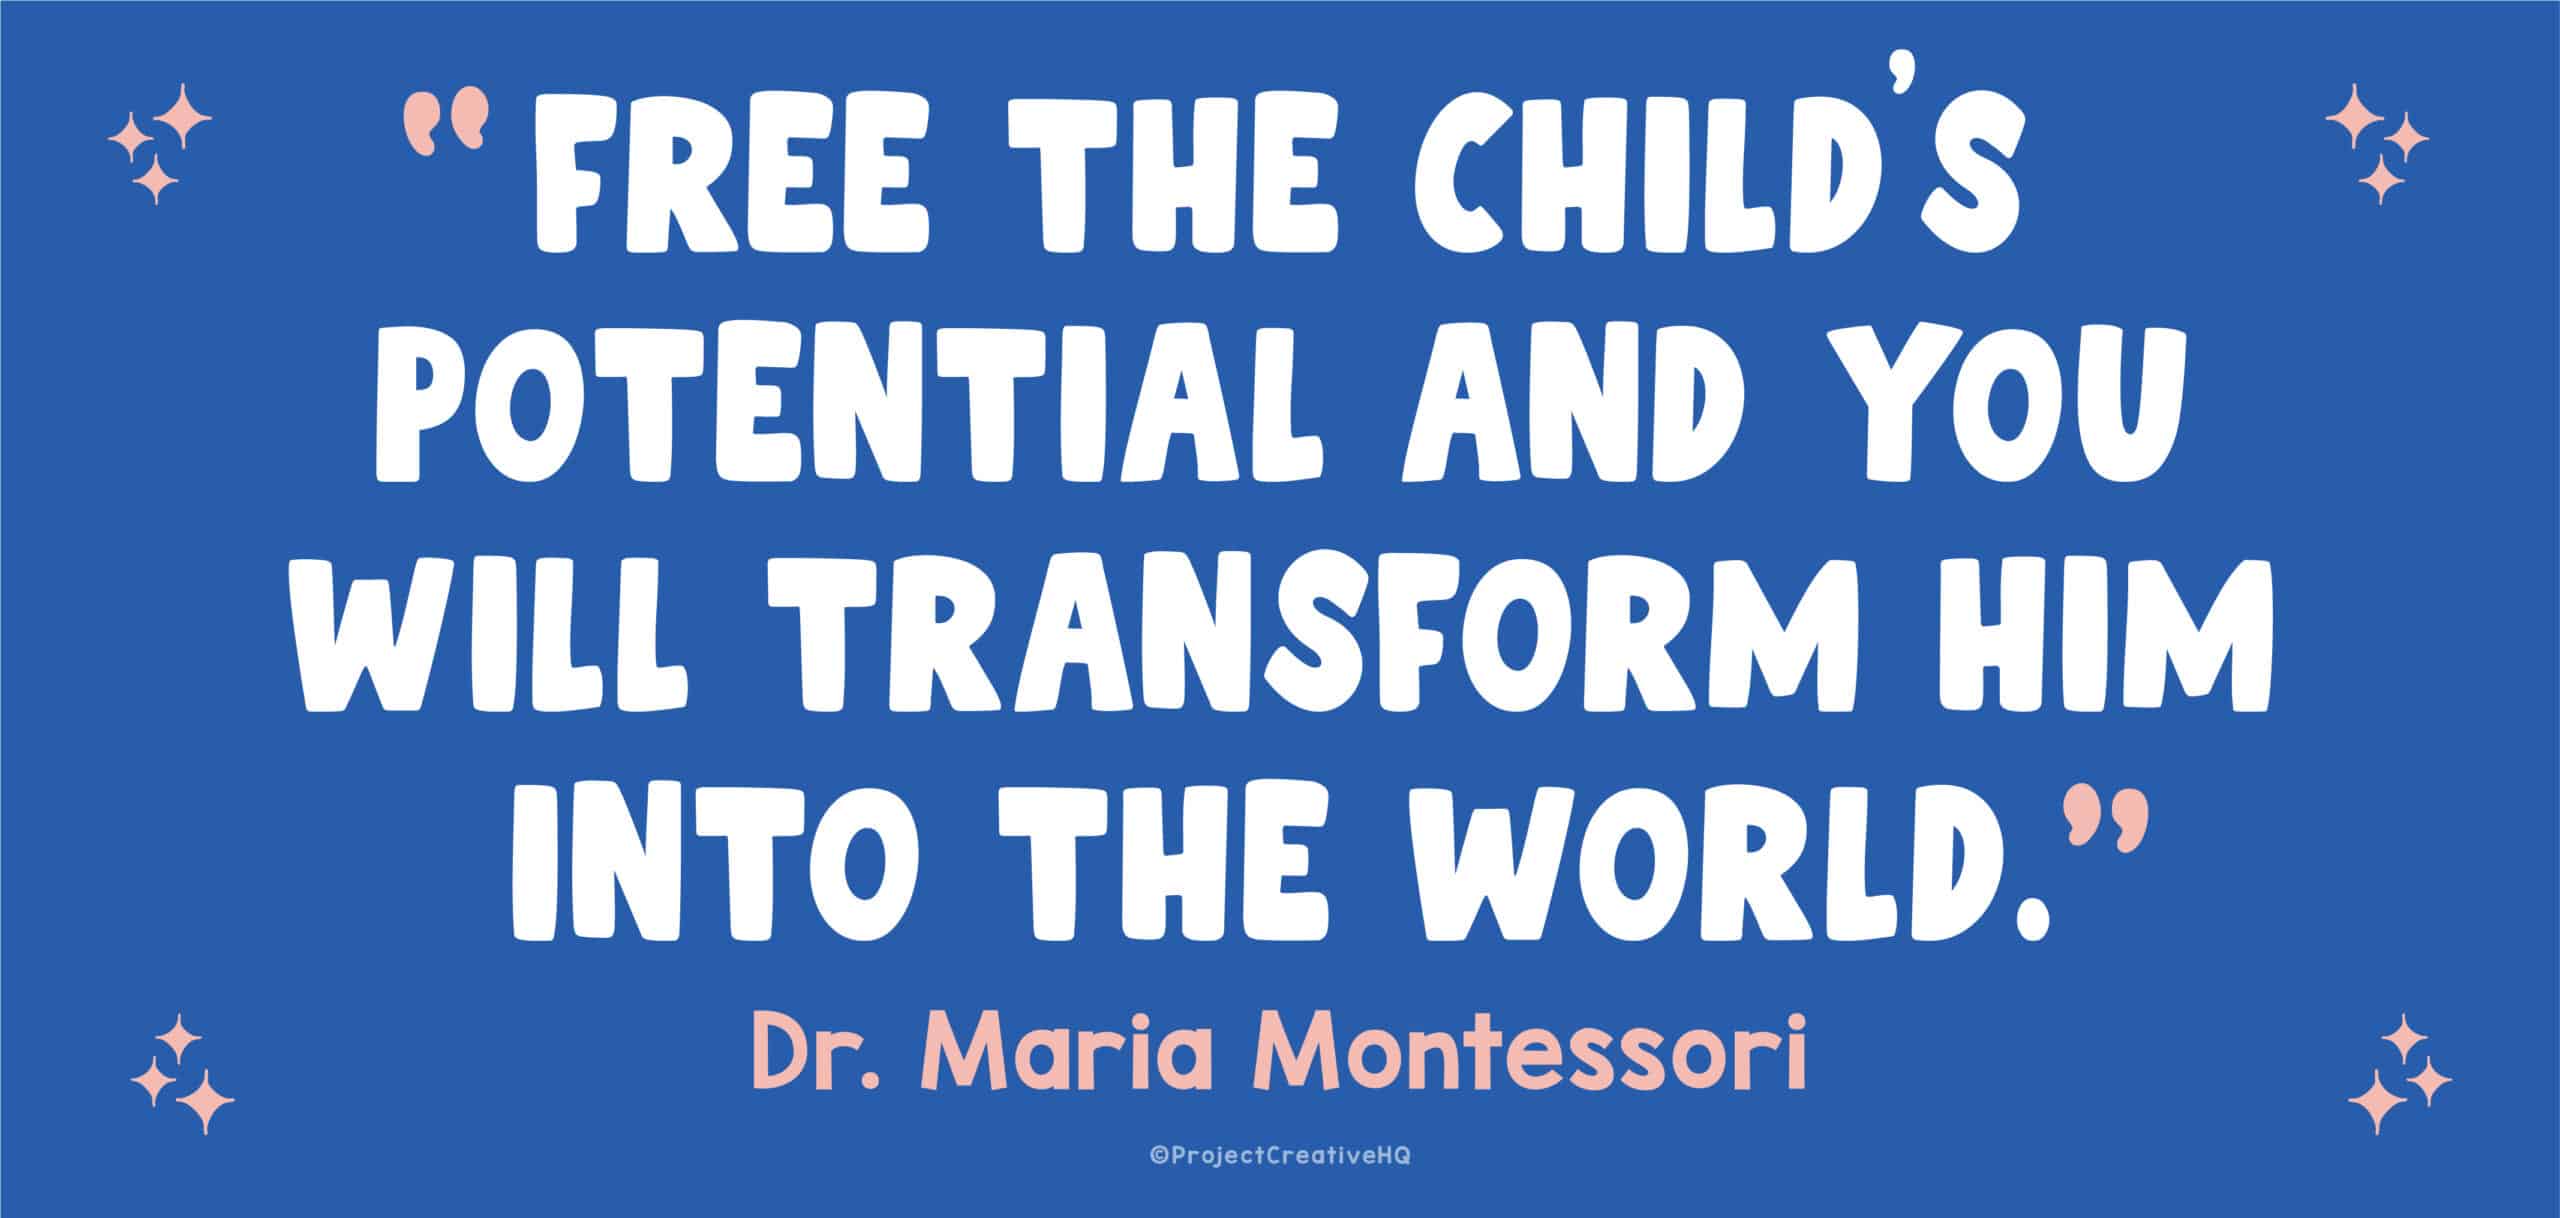 A poster with a Montessori peace quote on it, "Free the child's potential and you will transform him into the world."